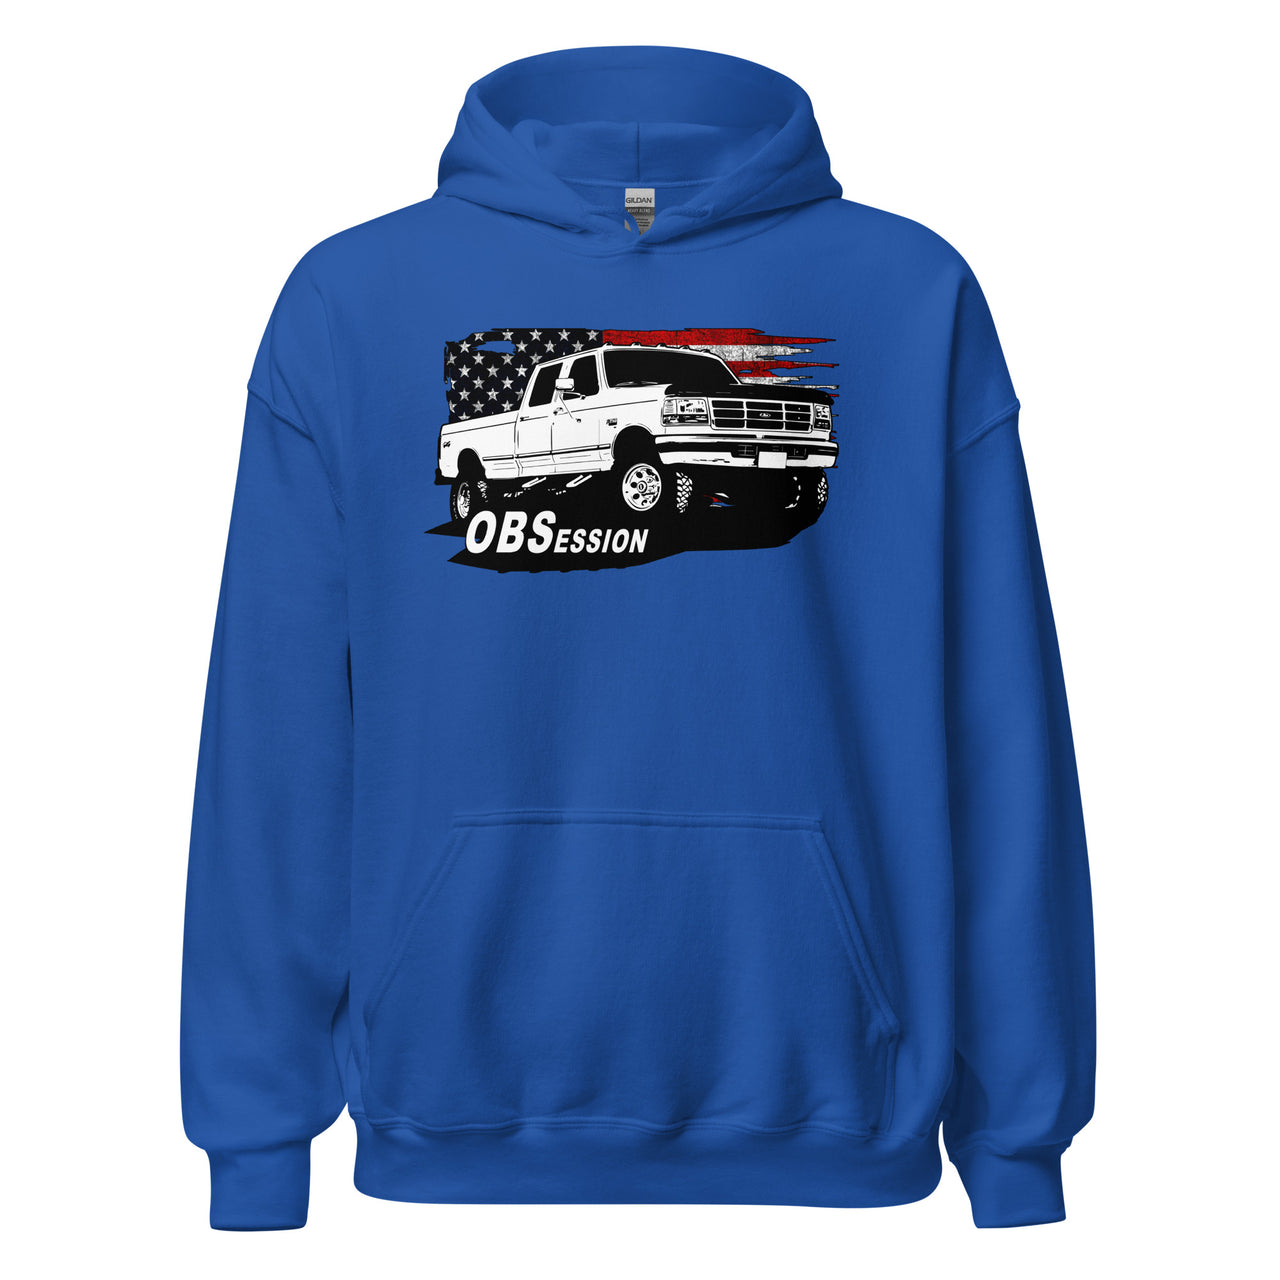 OBS Crew Cab Truck Hoodie with American Flag design - royal